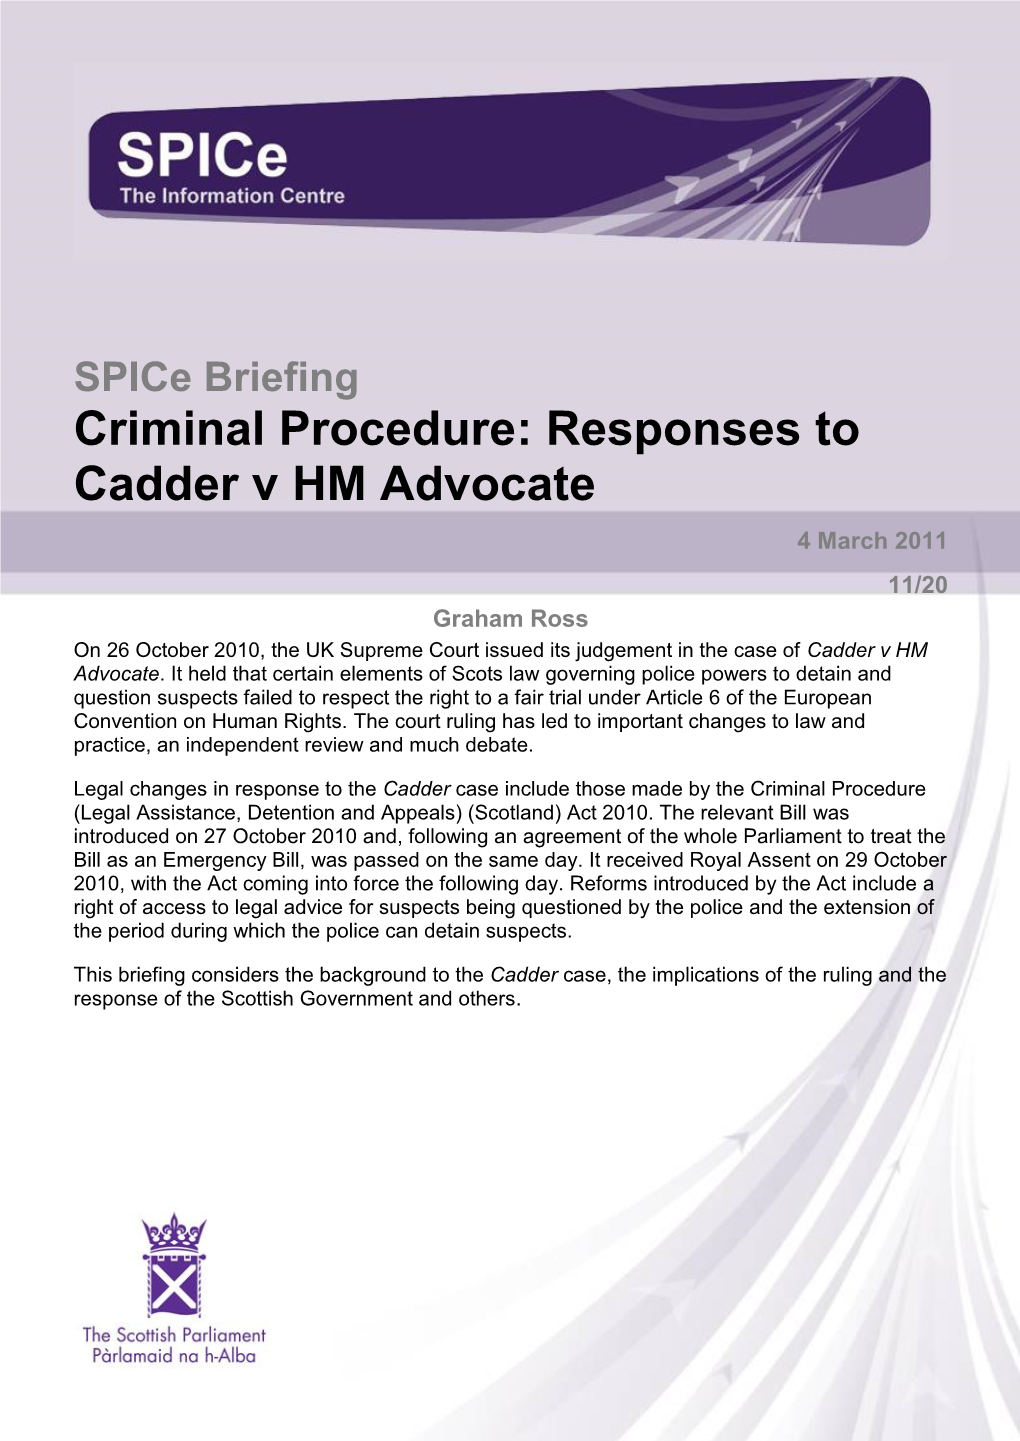 Responses to Cadder V HM Advocate 4 March 2011 11/20 Graham Ross on 26 October 2010, the UK Supreme Court Issued Its Judgement in the Case of Cadder V HM Advocate